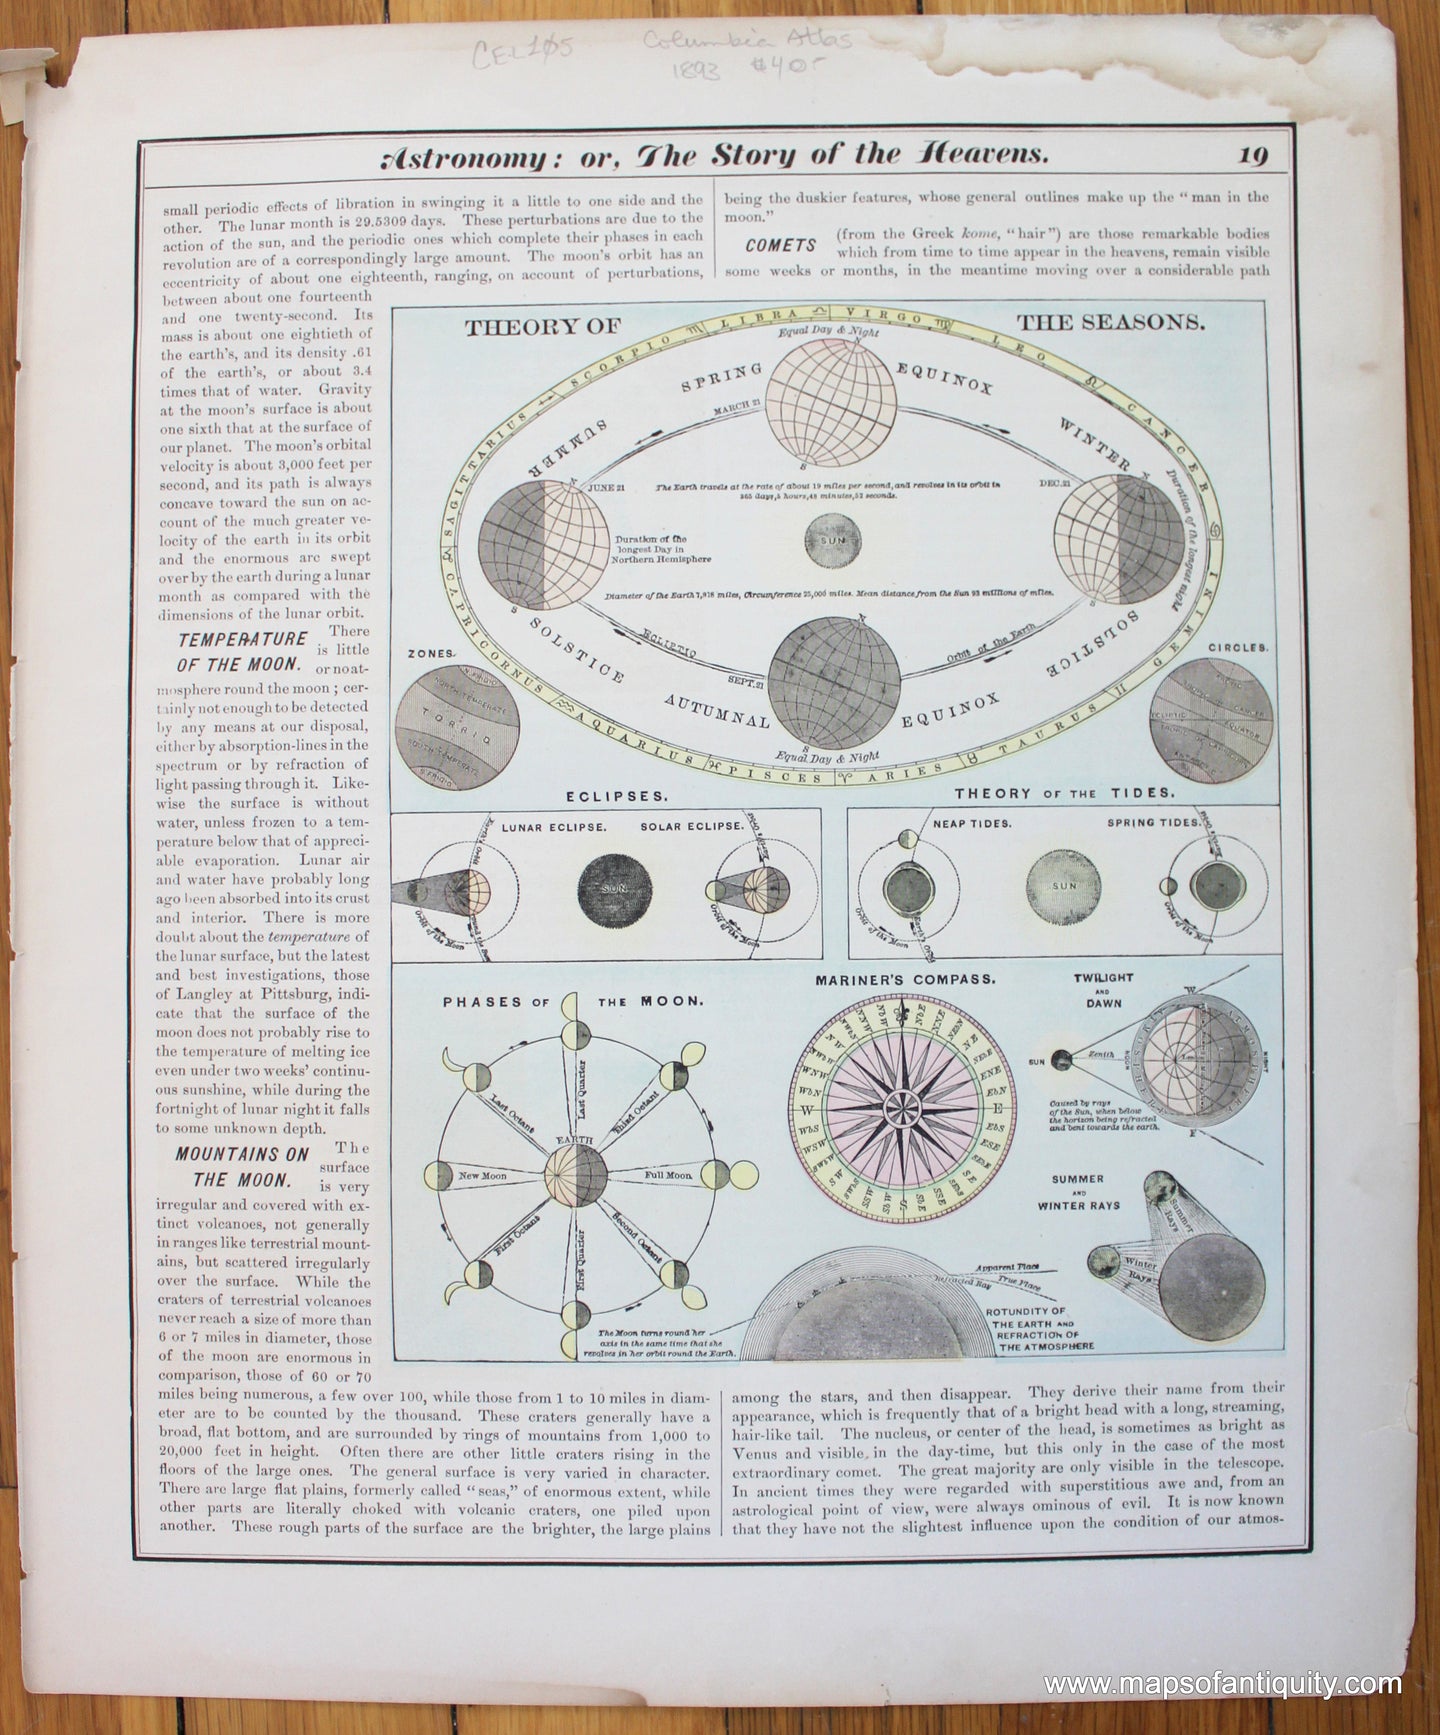 Antique-Astronomy-or-the-Story-of-the-Heavens-Theory-of-the-Seasons-Tides-Eclipses-Phases-of-the-Moon-Diagram-Celestial-Print-Maps-of-Antiquity